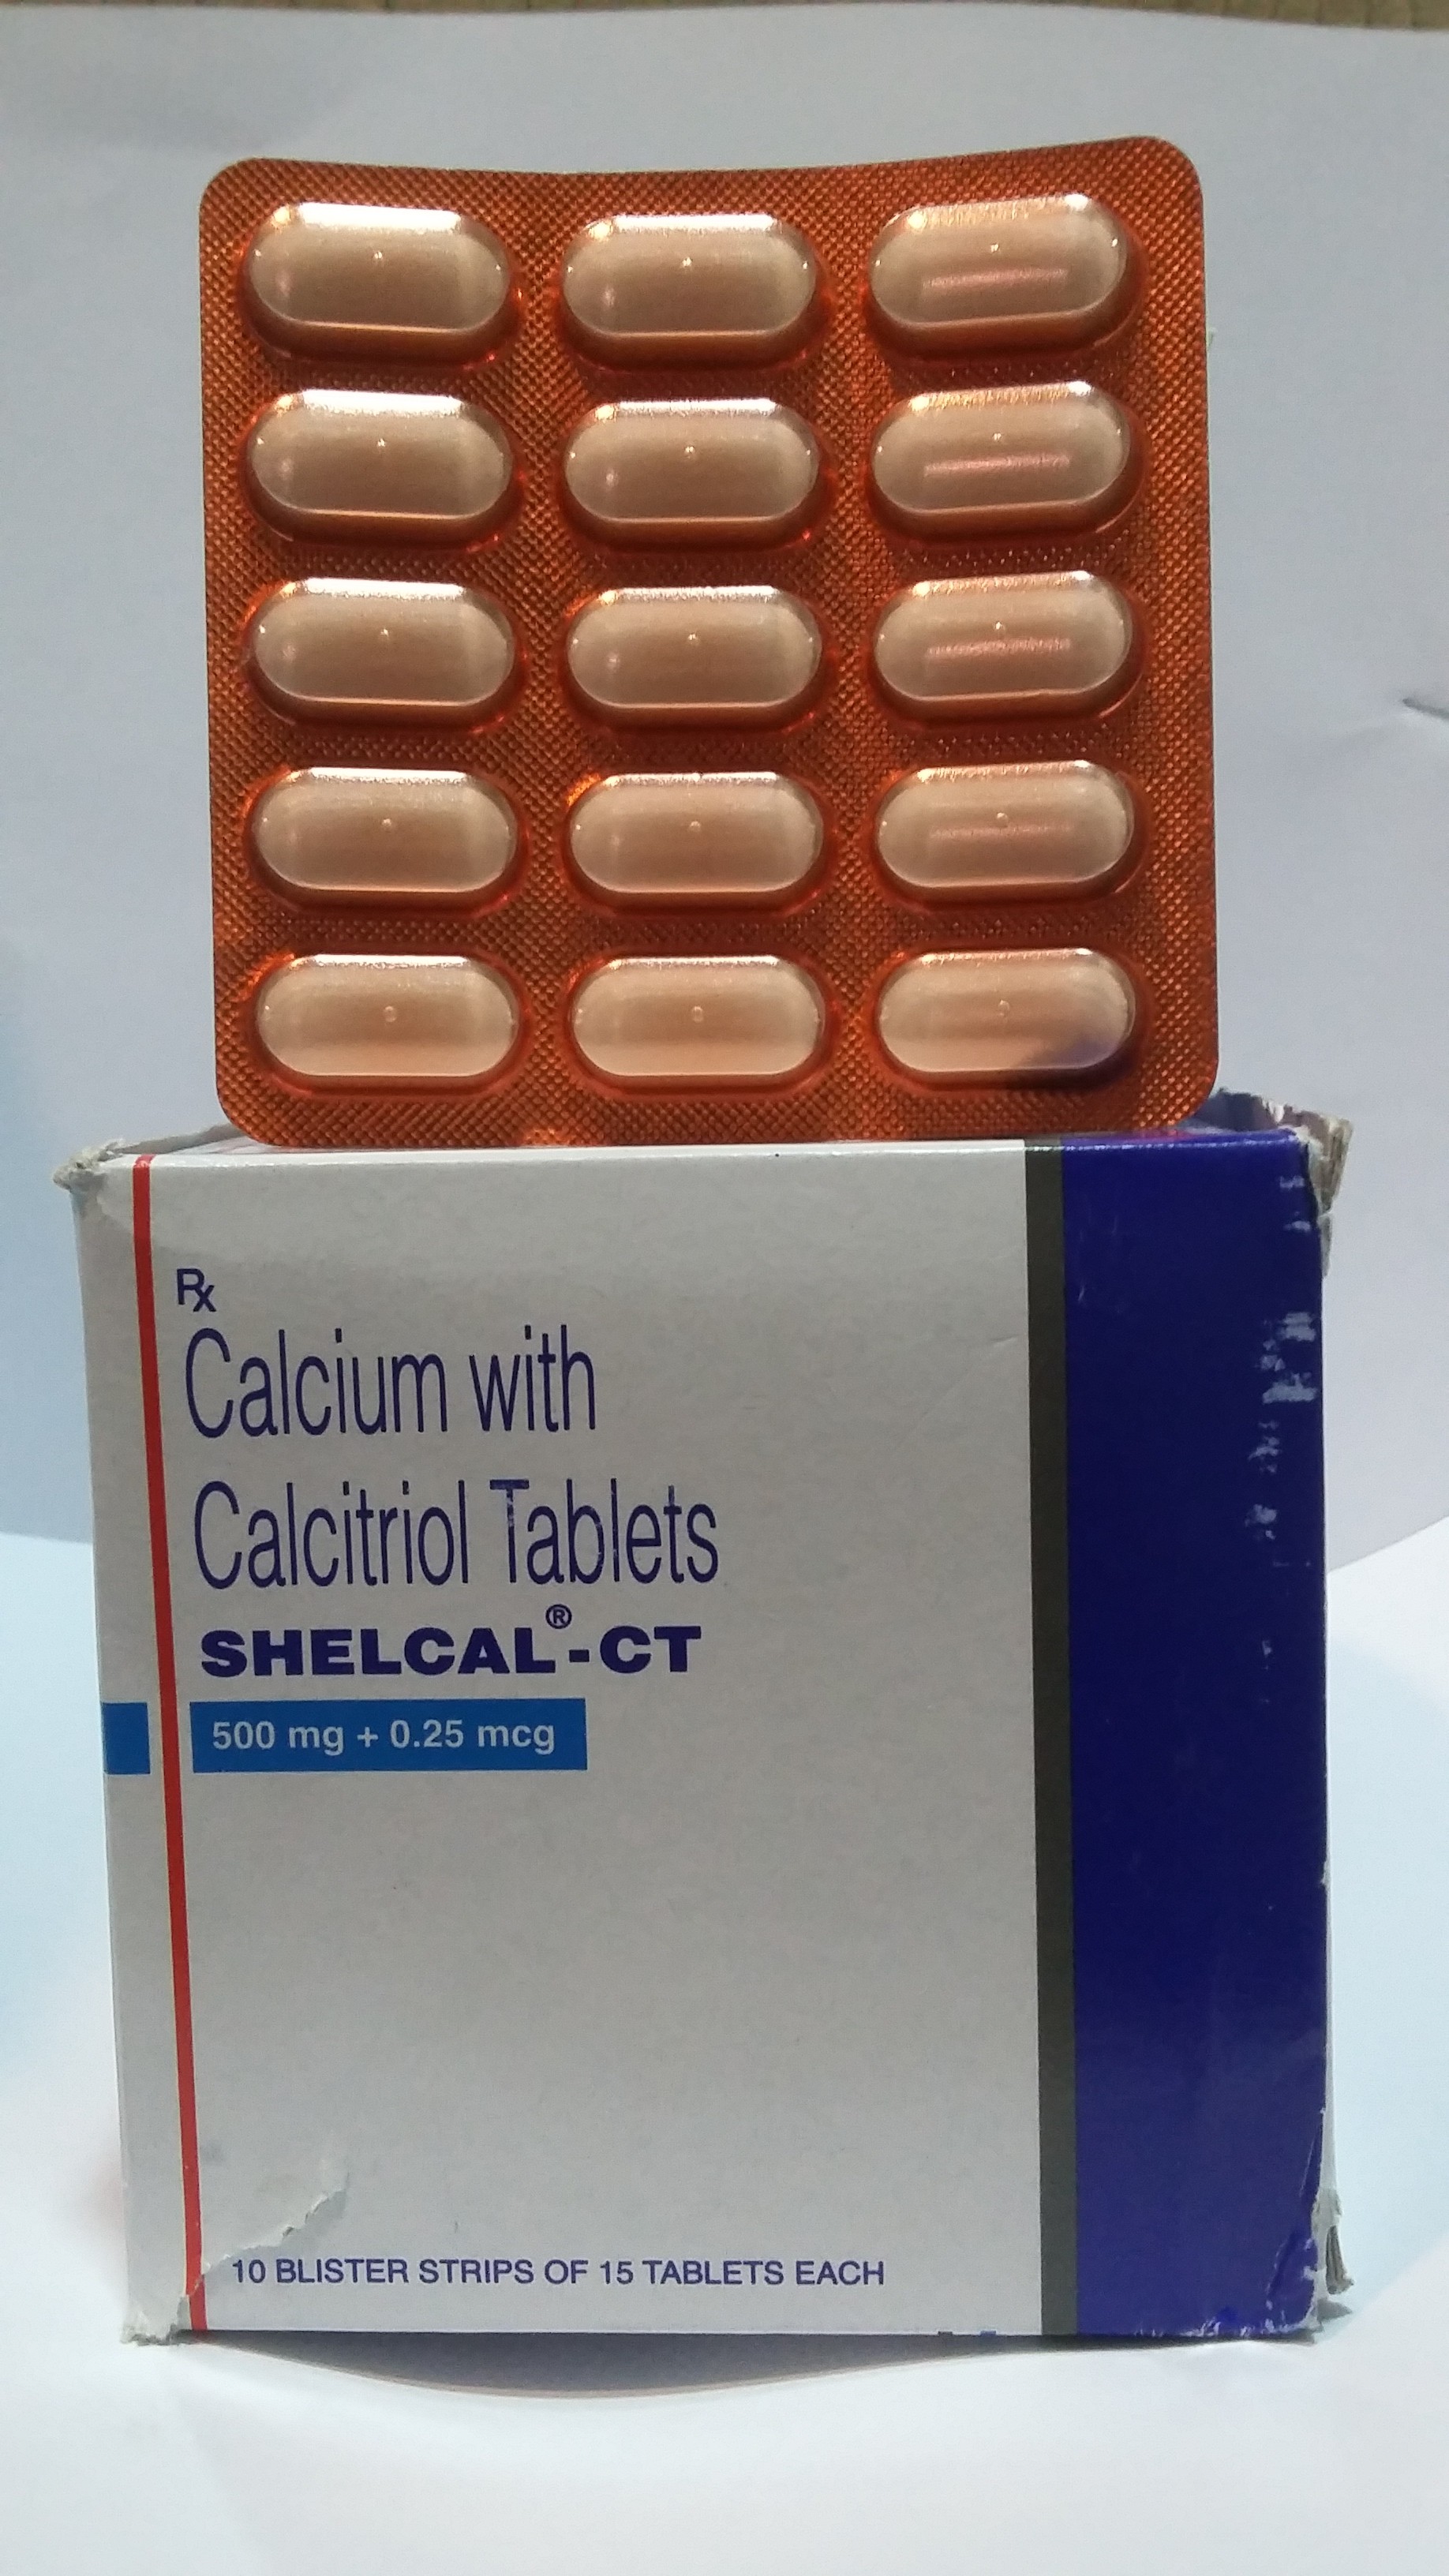 Shelcal-ct Tablet